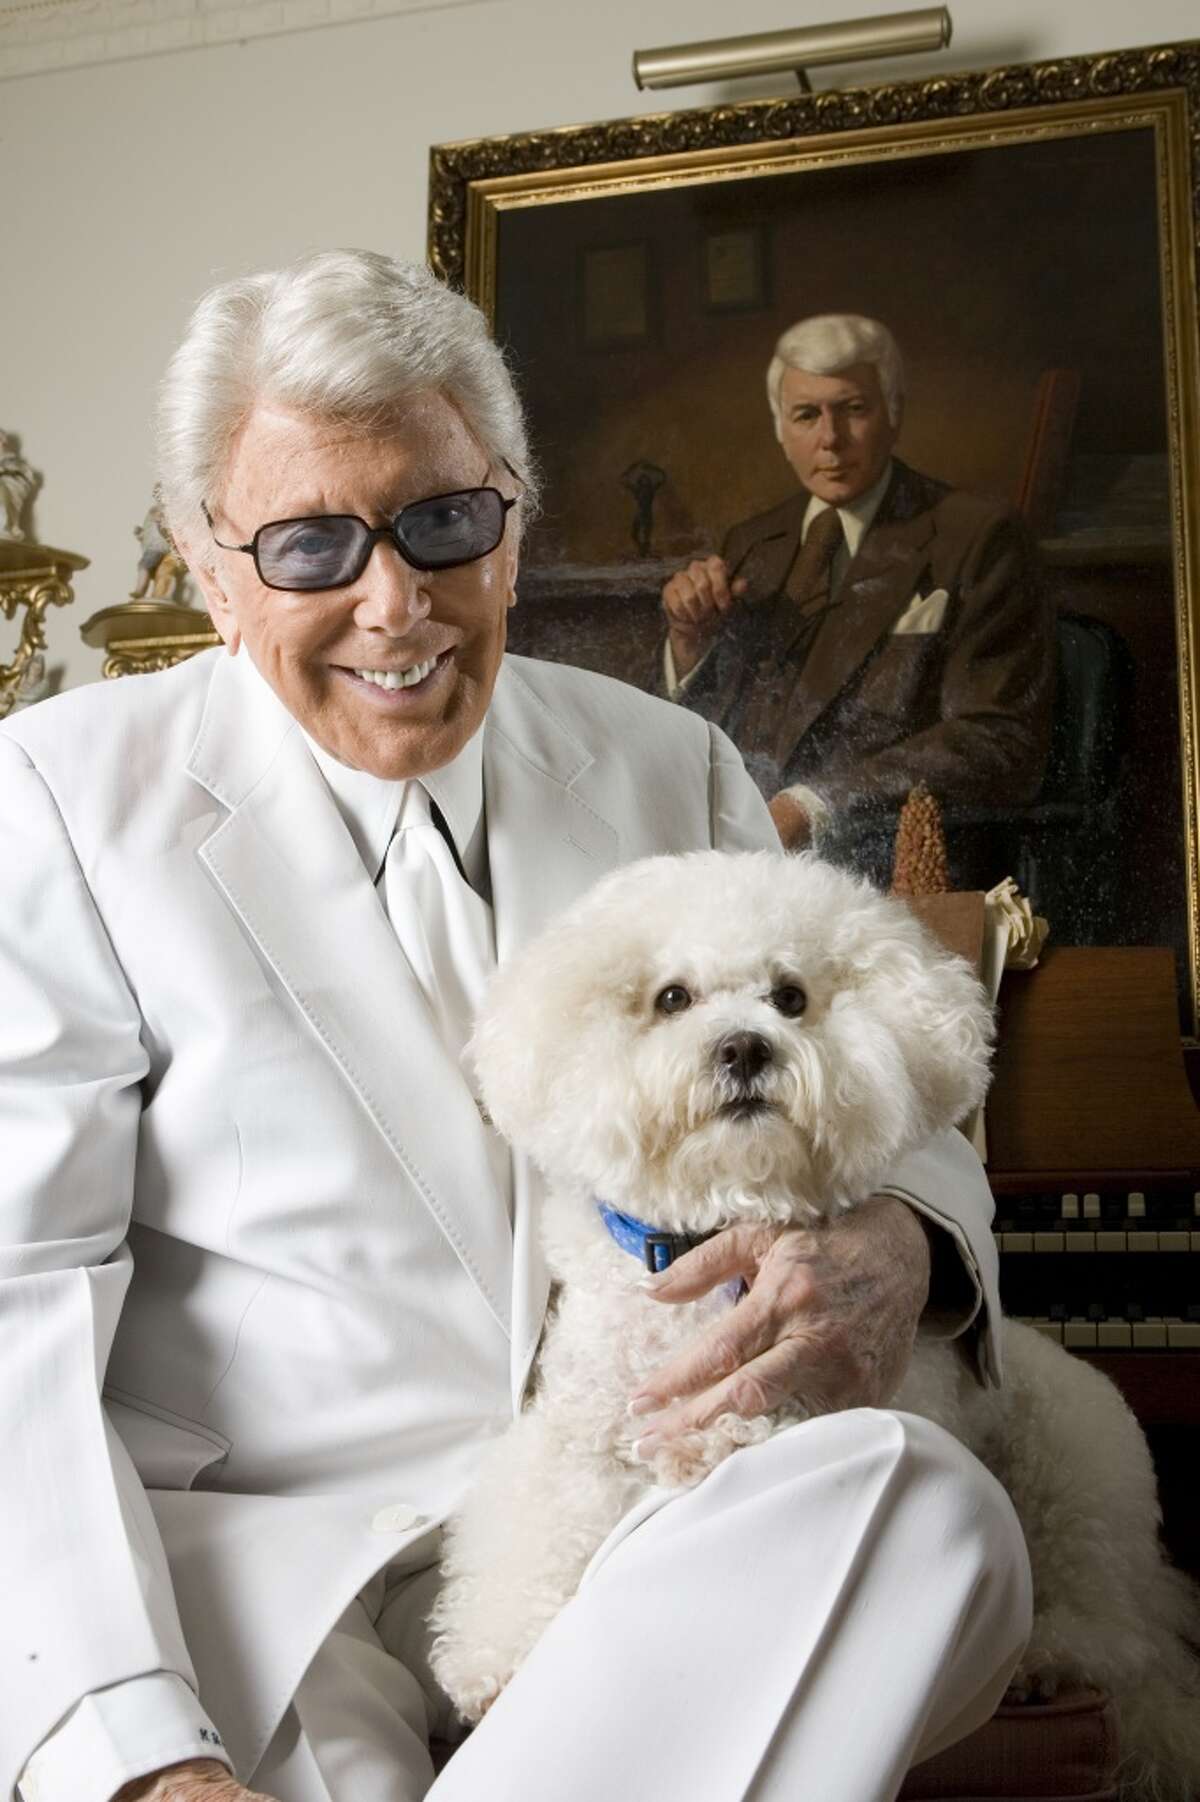 Marvin Zindler  Mr. "Slime In The Ice Machine" passed away in 2007.